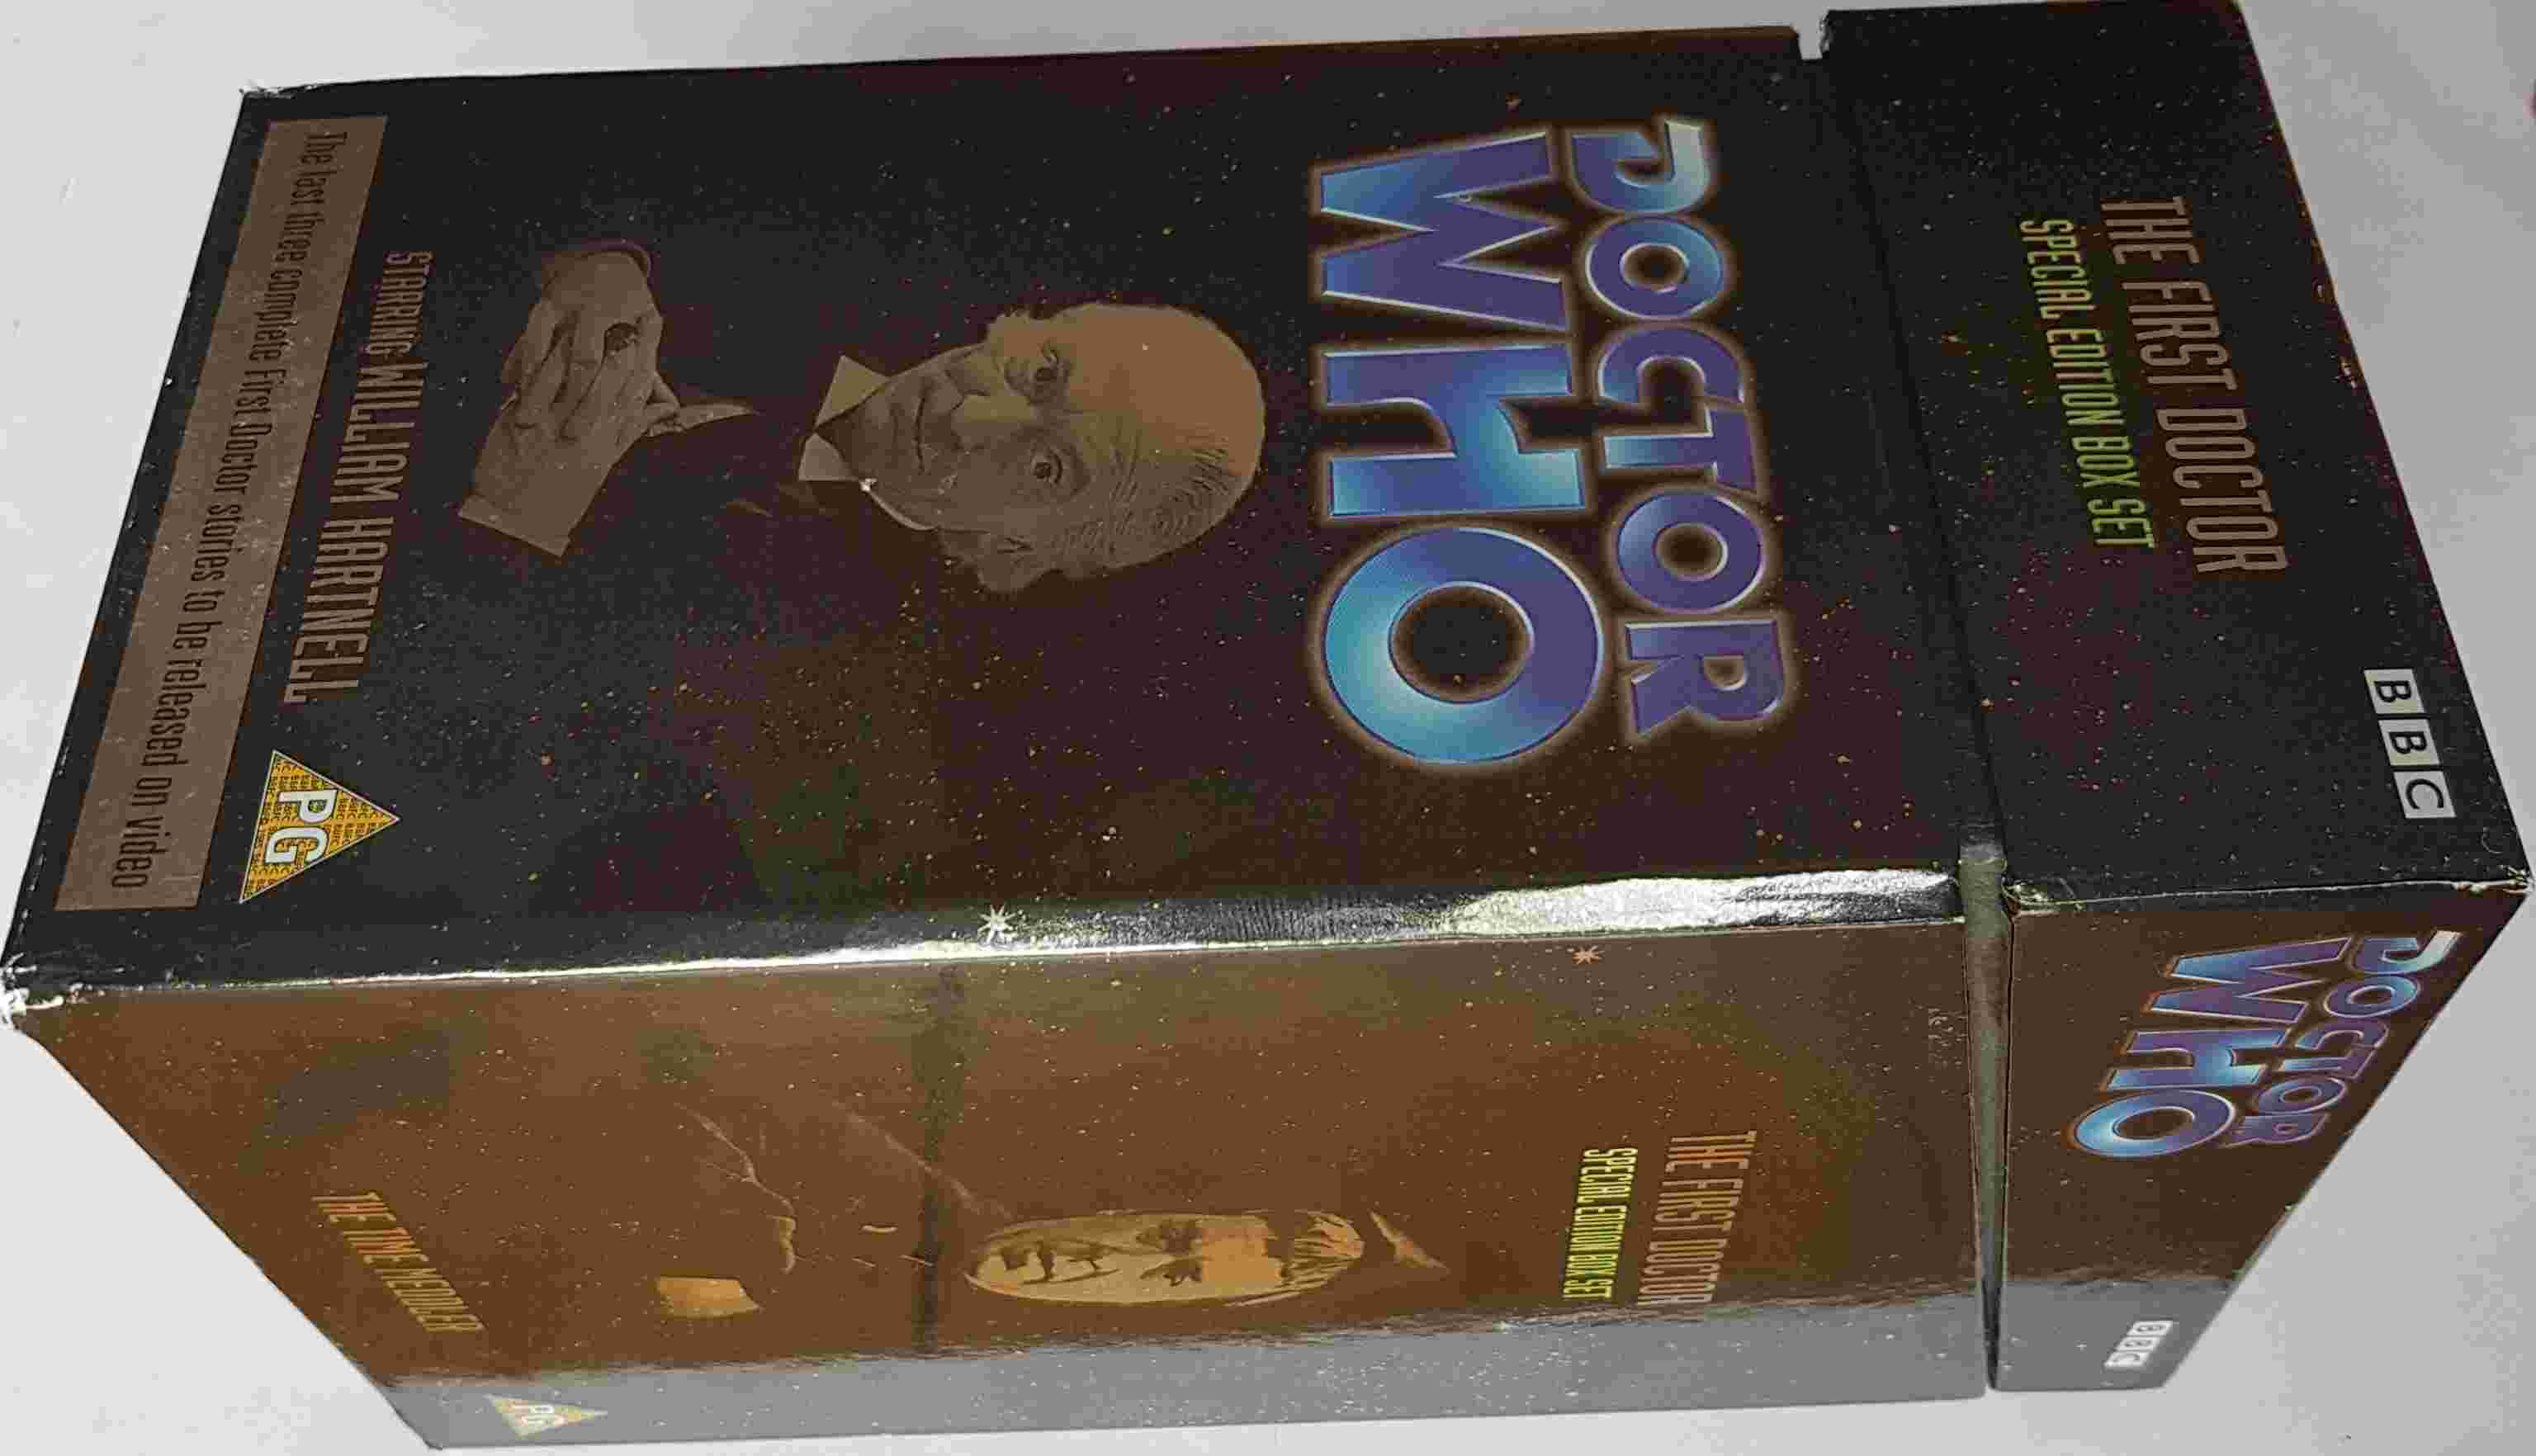 Picture of BBCV 7268 Doctor Who - The first doctor - Special edition boxed set video by artist Peter R. Newman / Dennis Spooner / Donald Cotton from the BBC records and Tapes library